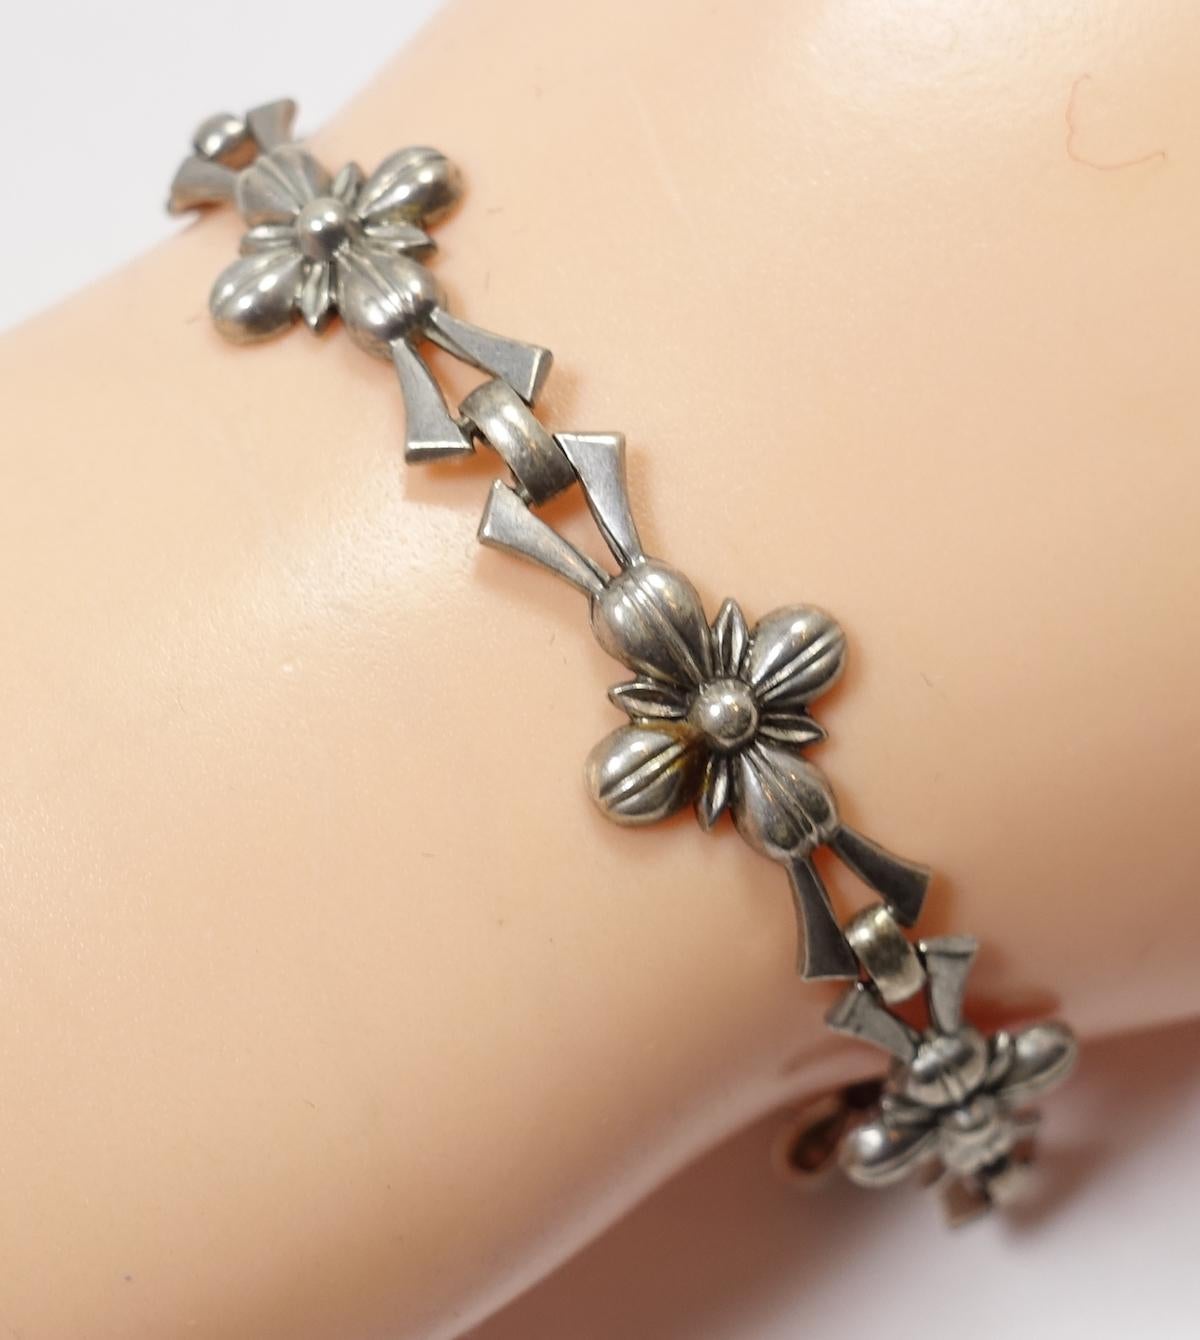 This vintage signed WRE bracelet features multiple floral links in a sterling silver setting.  In excellent condition, this bracelet measures 8” x 1/2” with a fold-over clasp and signed “Sterling WRE”.  